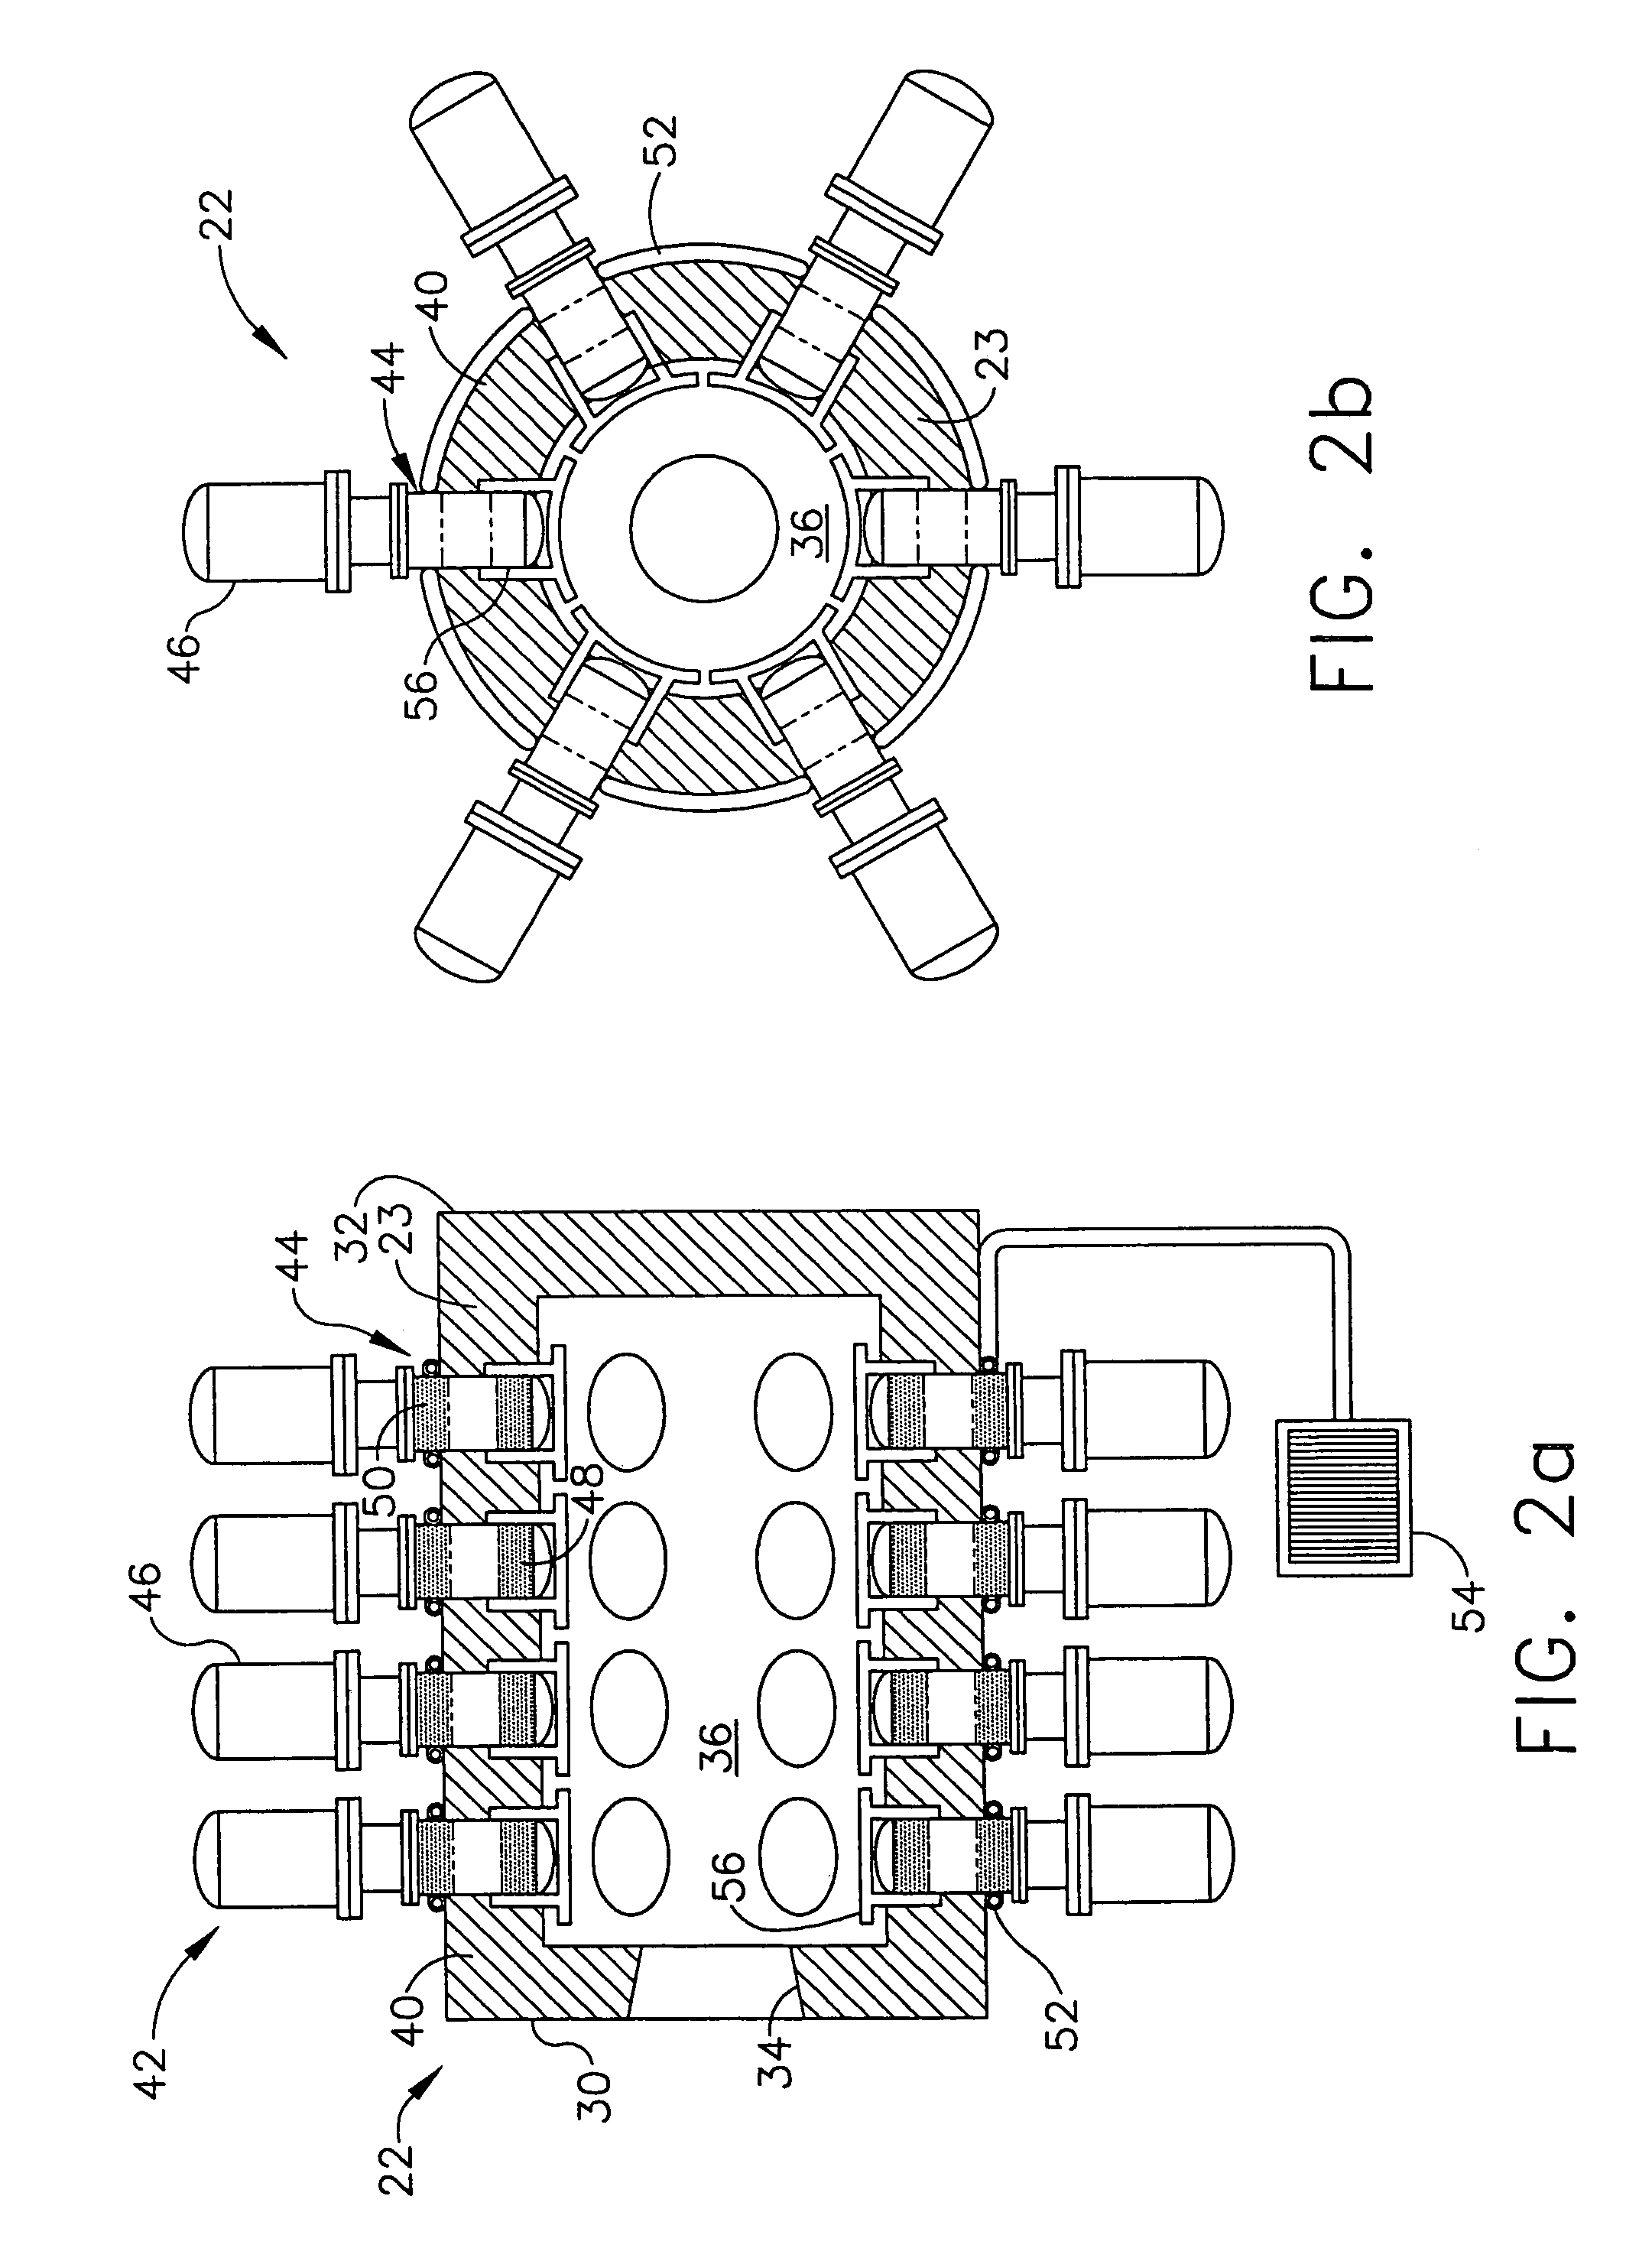 Method and apparatus for solar power conversion